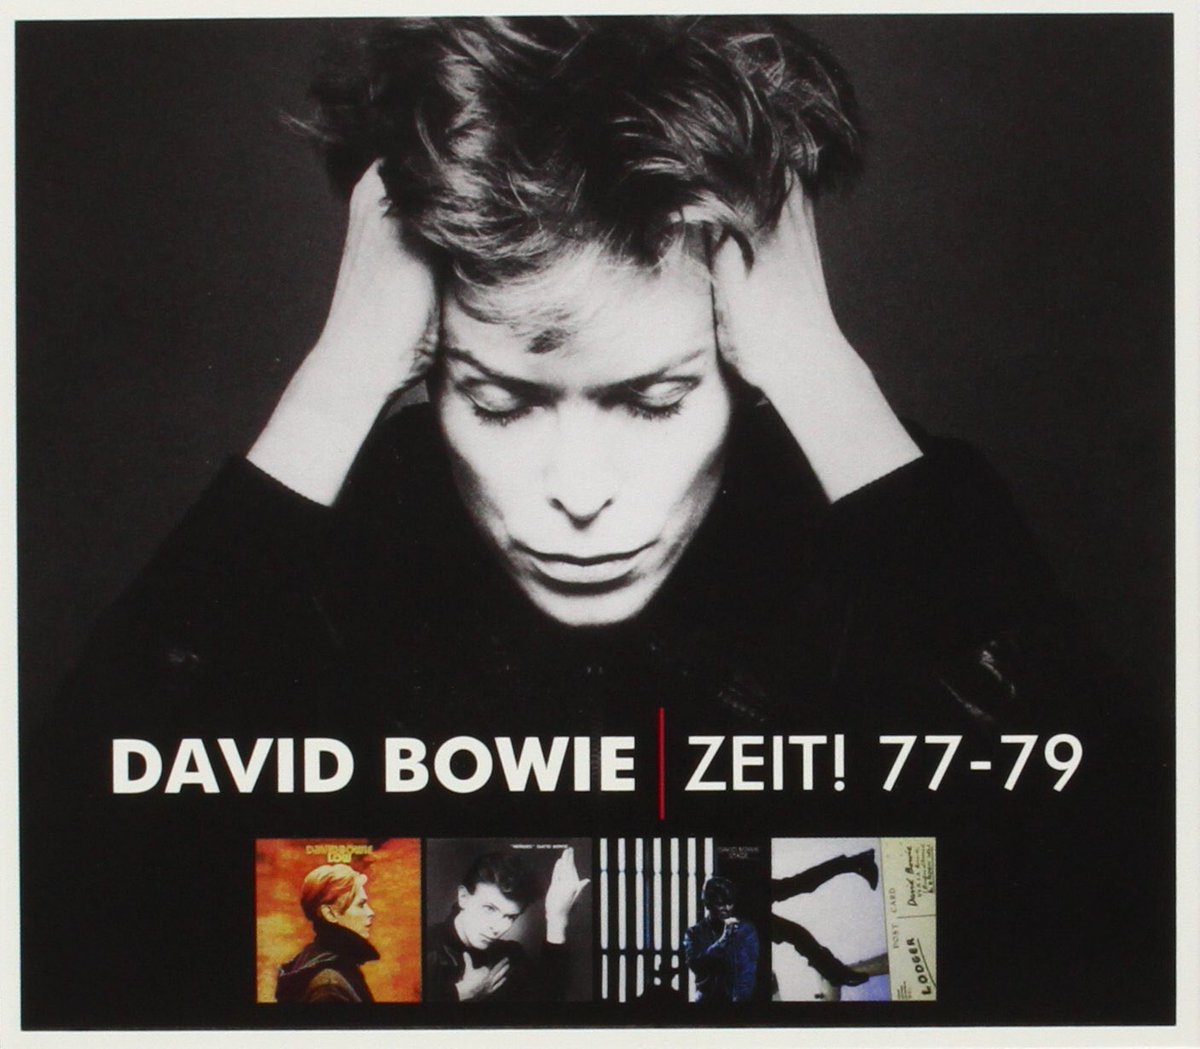 On this day, 11 years ago, David Bowie released the 'Zeit! 77-79' Box Set